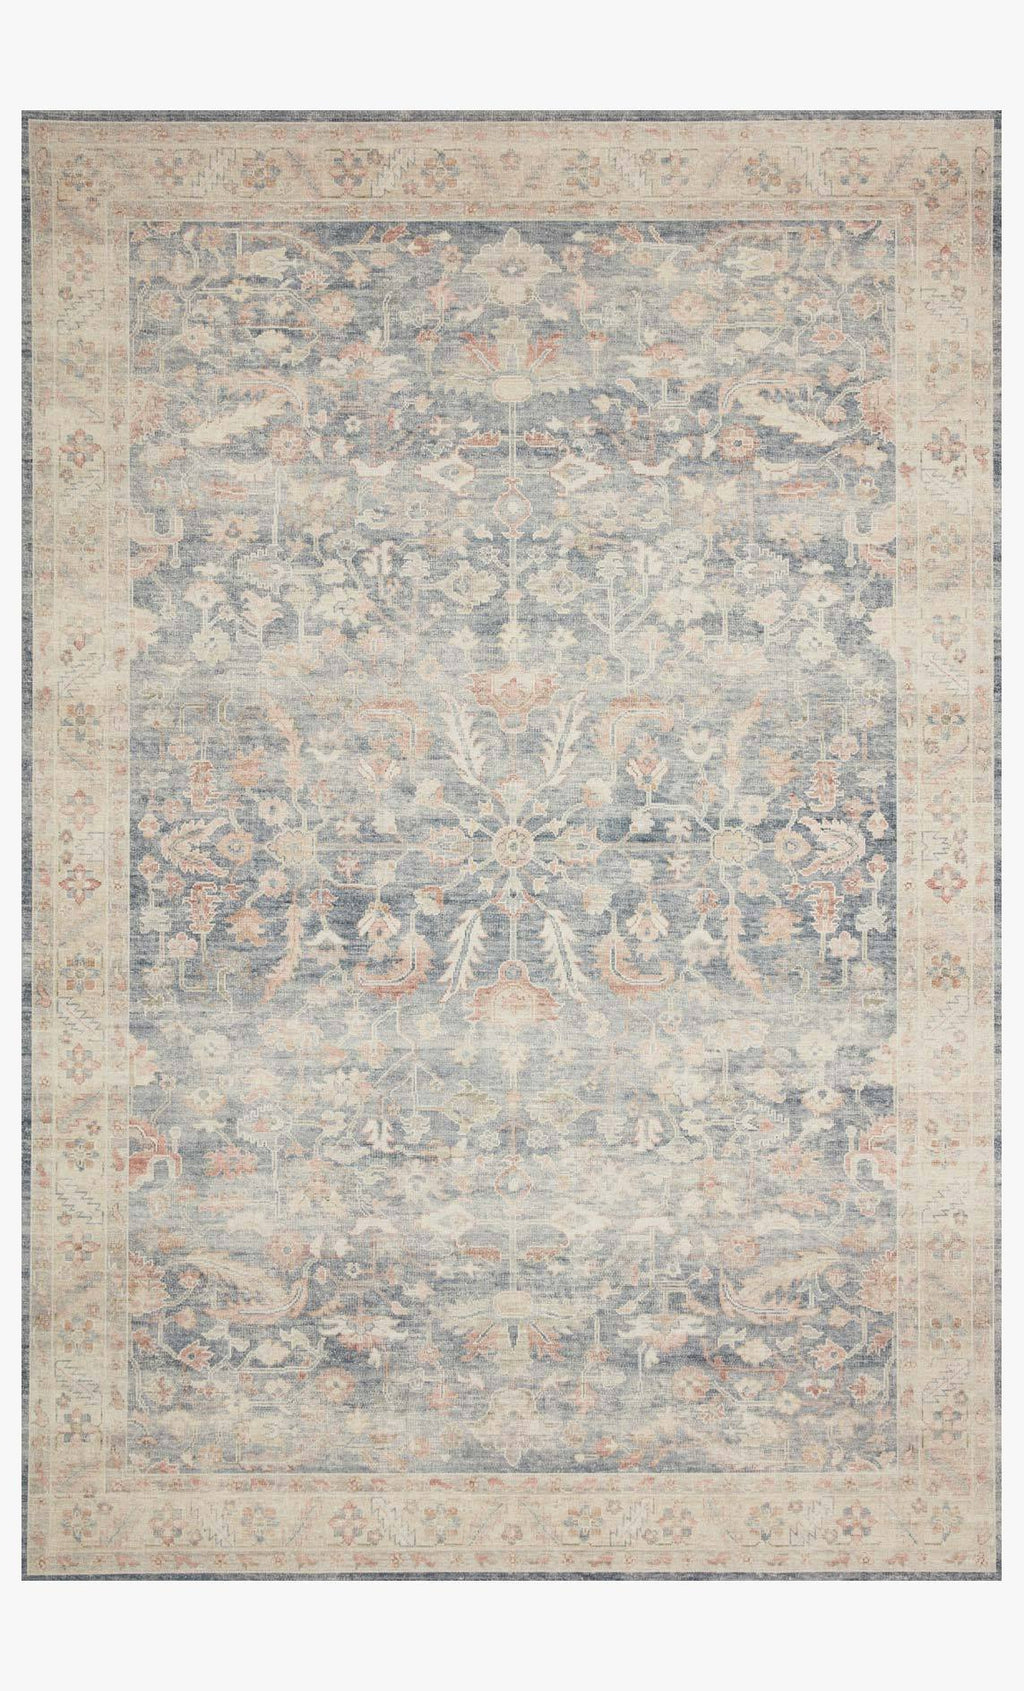 Hathaway Collection Rug in Denim / Multi